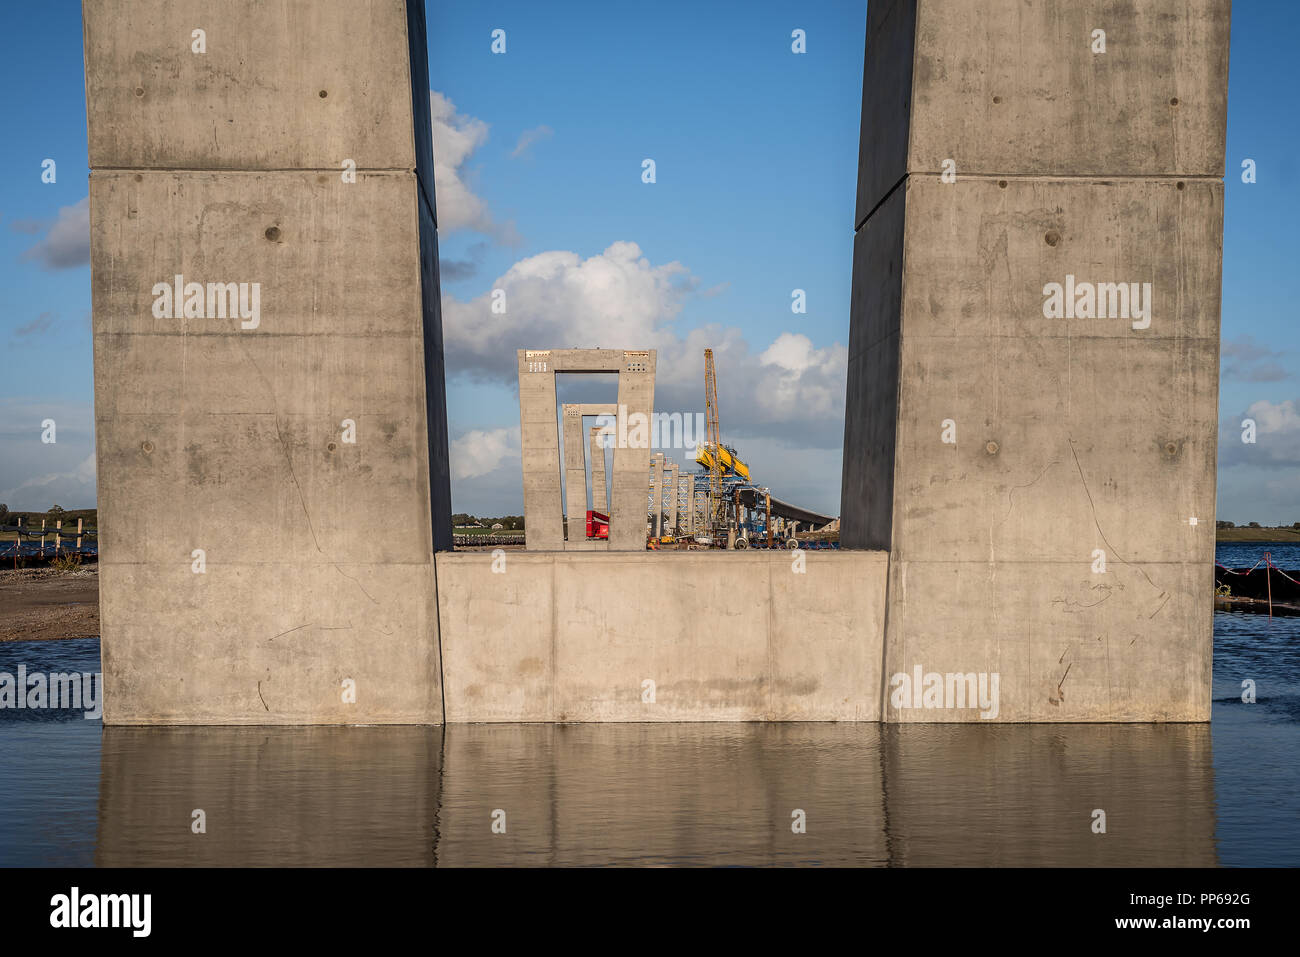 Concrete pylon at The Crown Princess Mary Bridge, a construction site in the water, Fredrikssund, Denmark, September 22, 2018 Stock Photo